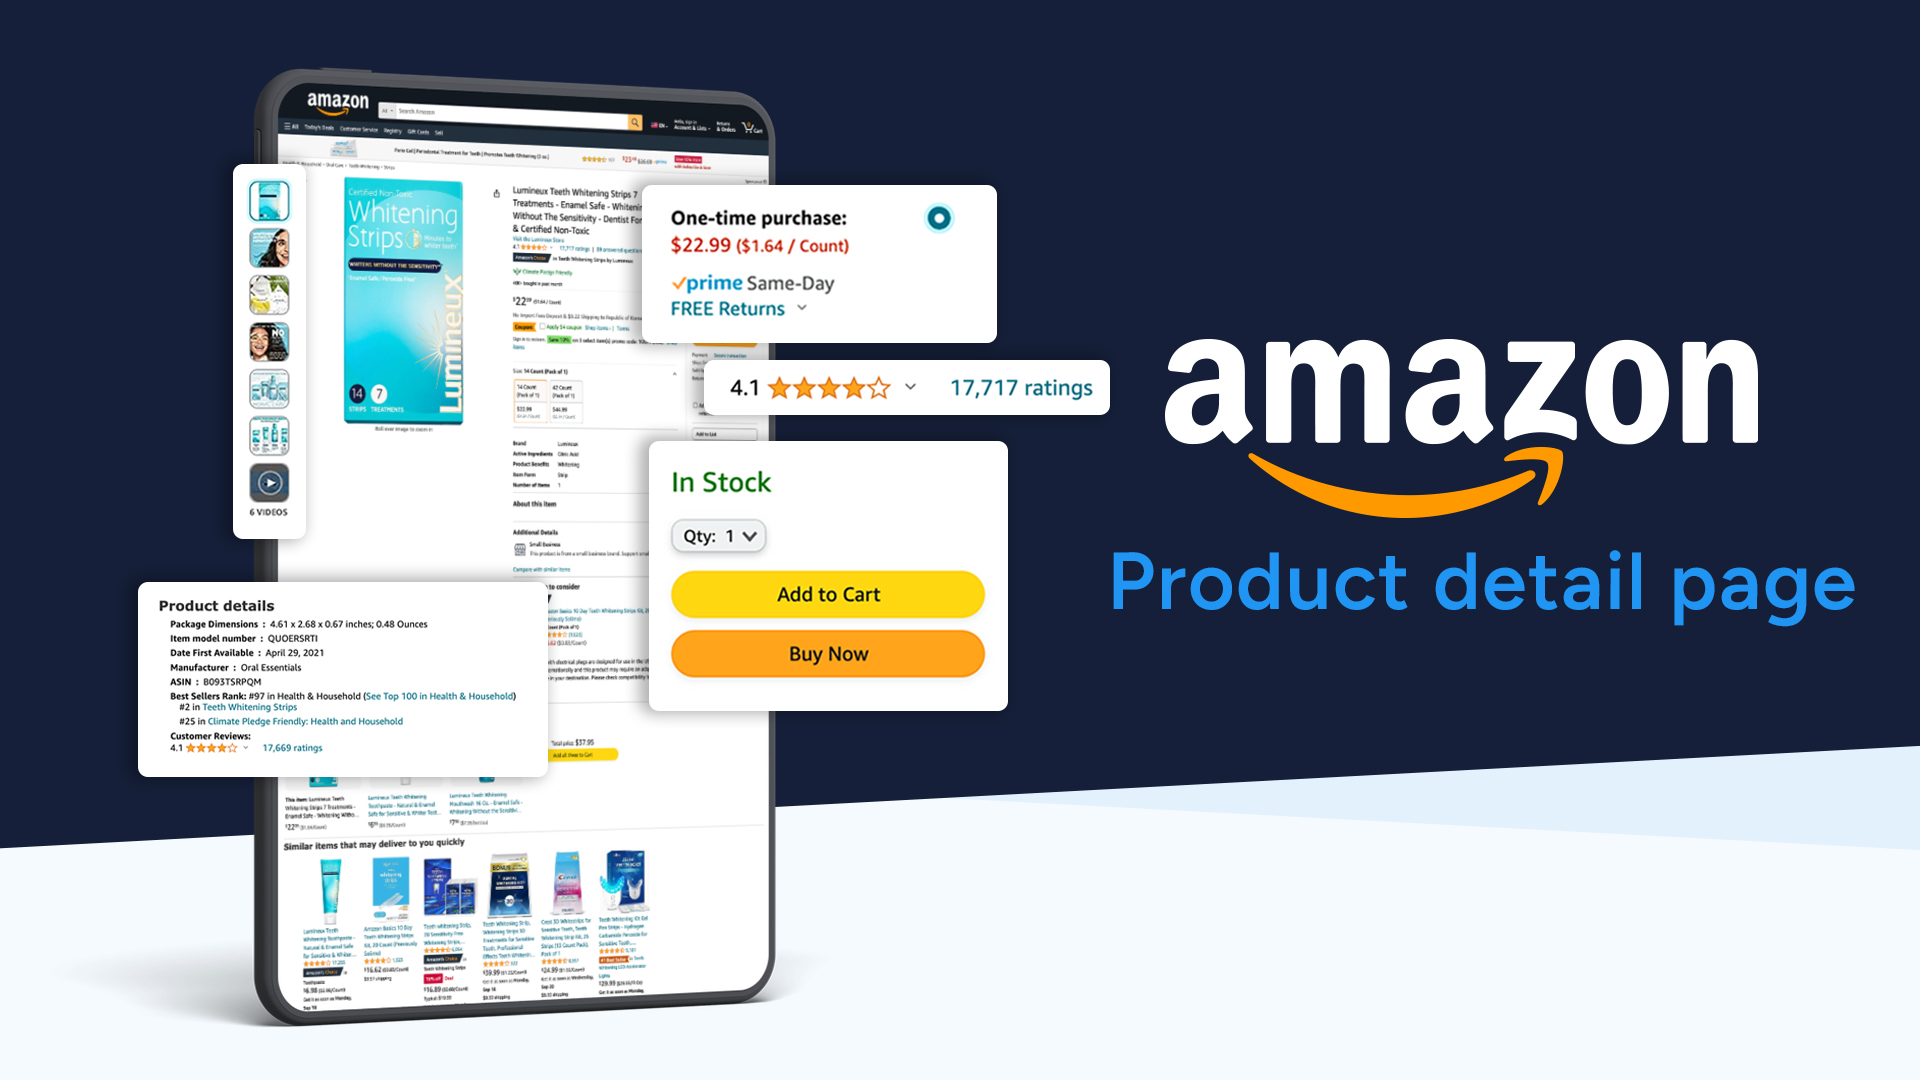 Amazon Product detail page